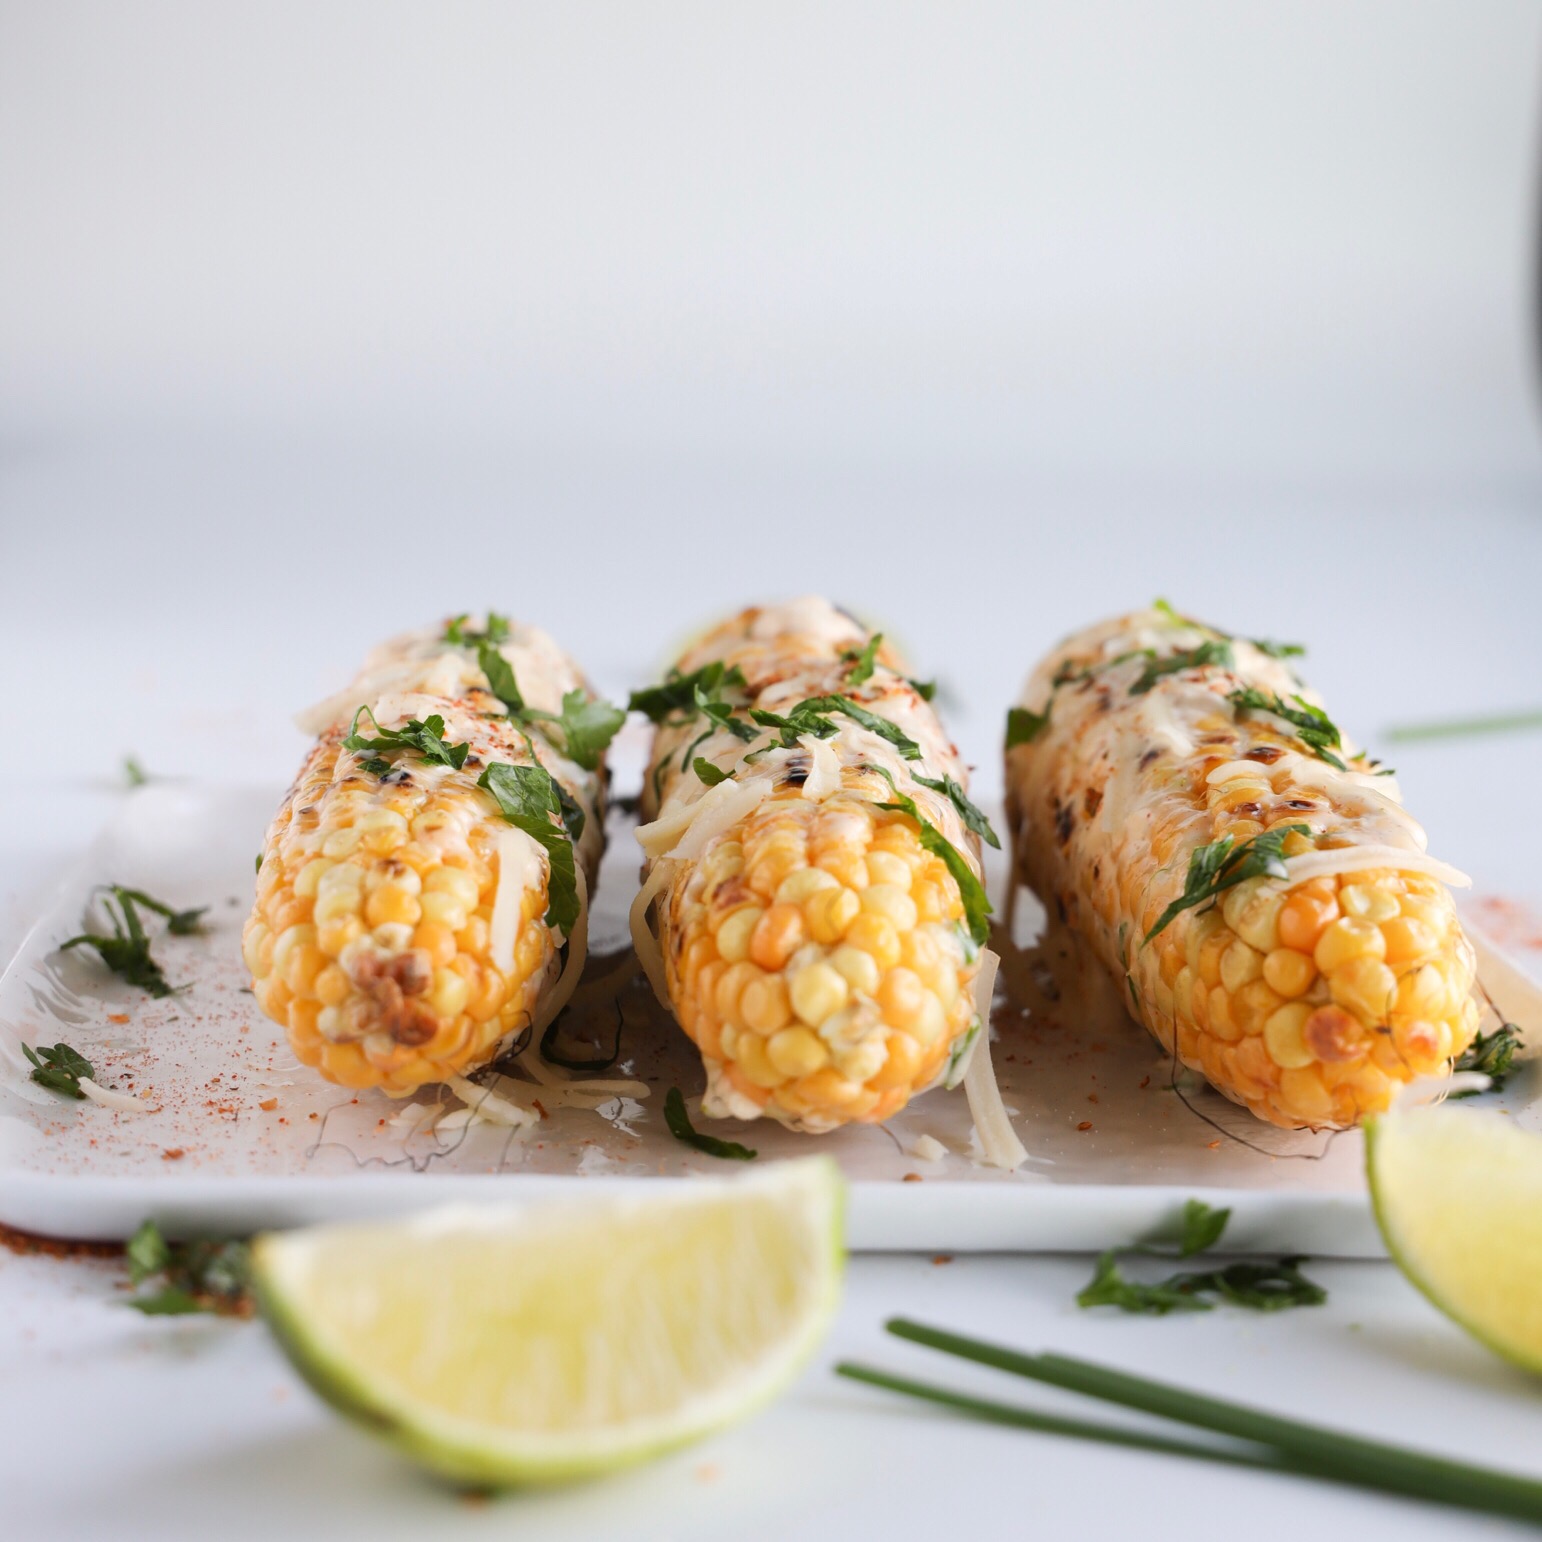 Mexican street corn or elotes is a traditional street food that is quick to make at home and is super addictive.